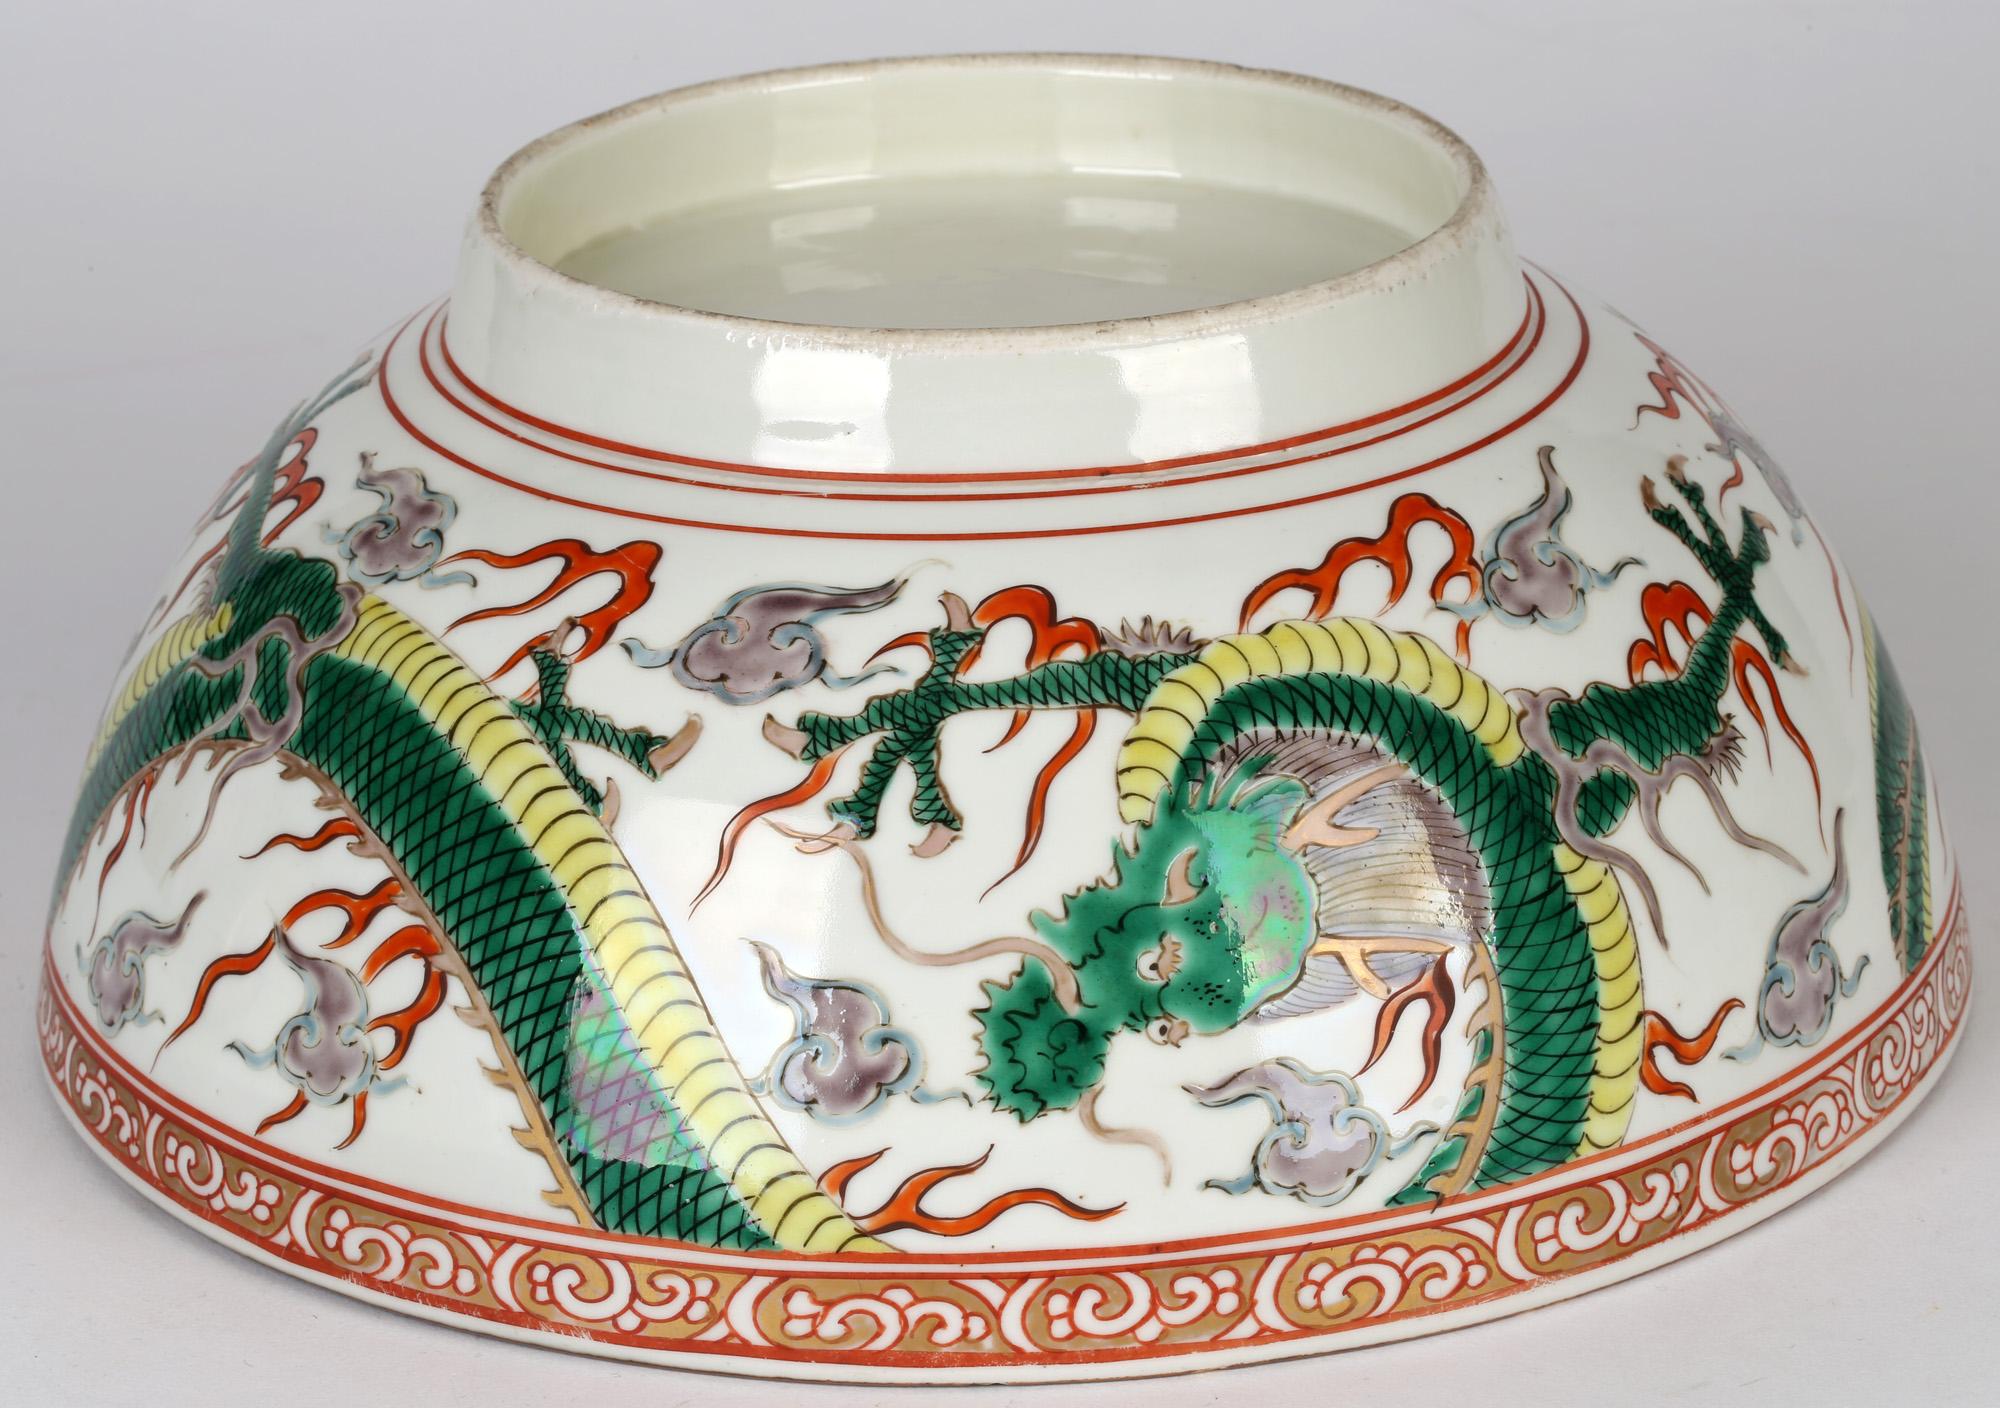 19th Century Chinese Large Qing Porcelain Famille Verte Palette Dueling Dragons Punch Bowl